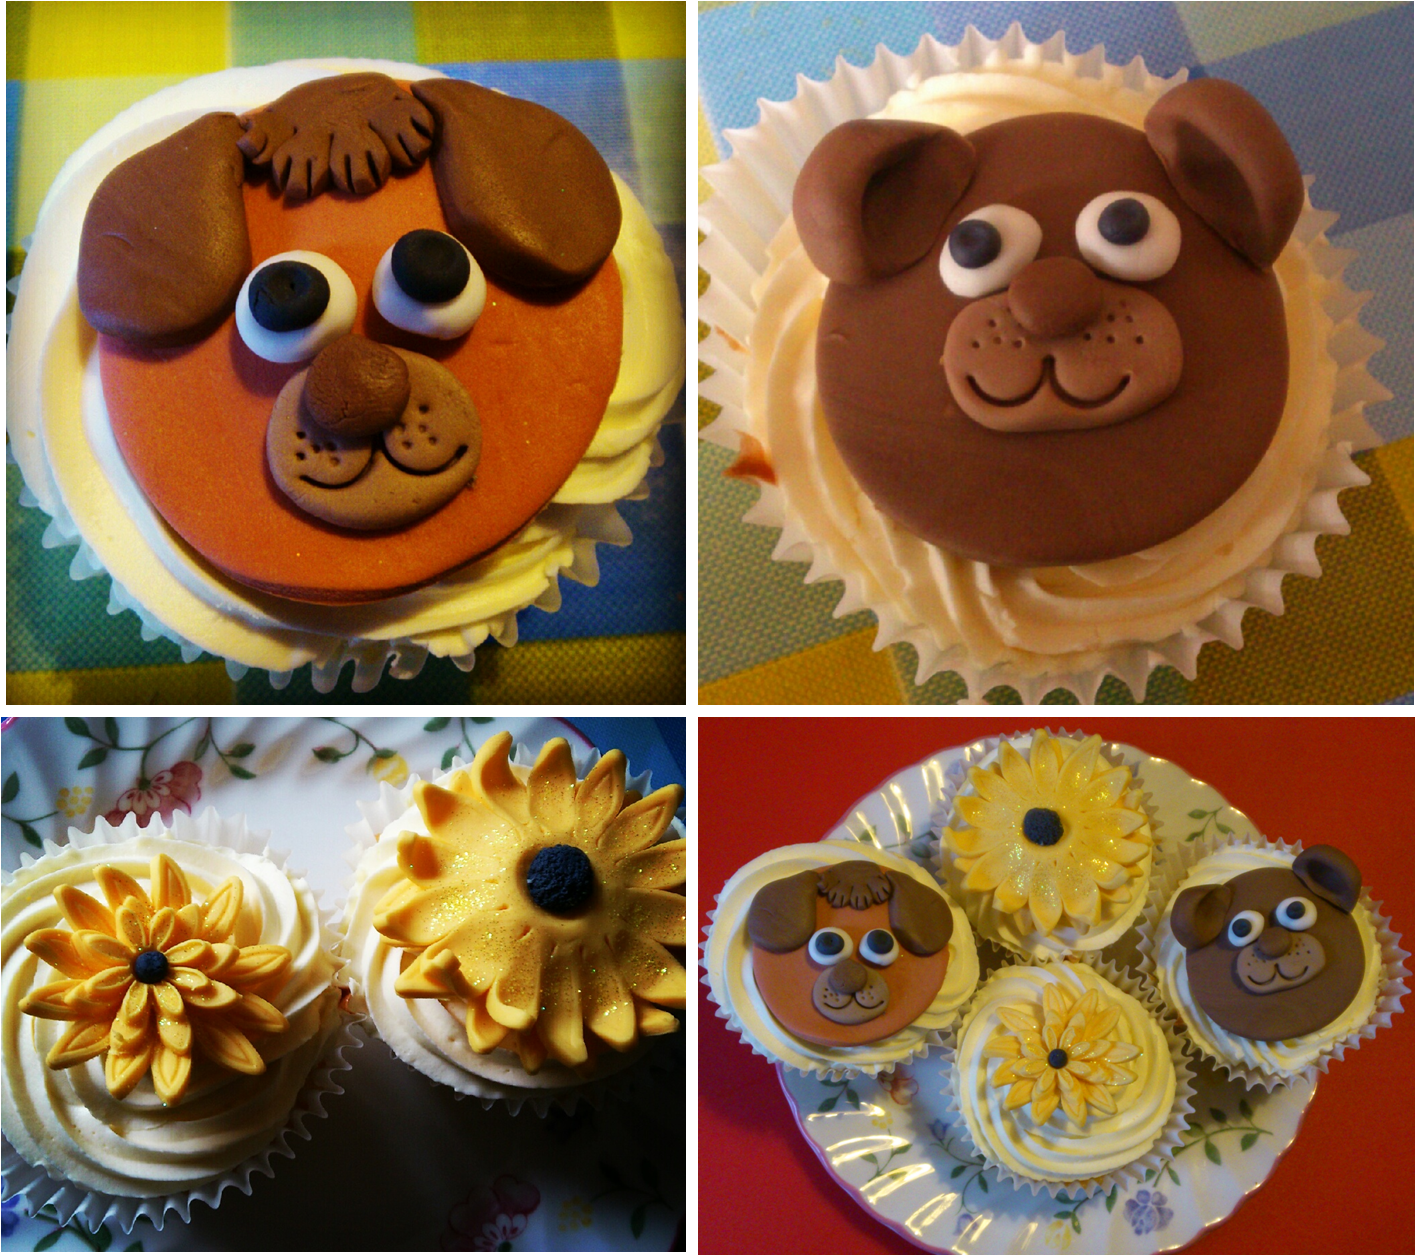 Utterly Scrummy Food For Families: National Cupcake Week - Art you can eat!